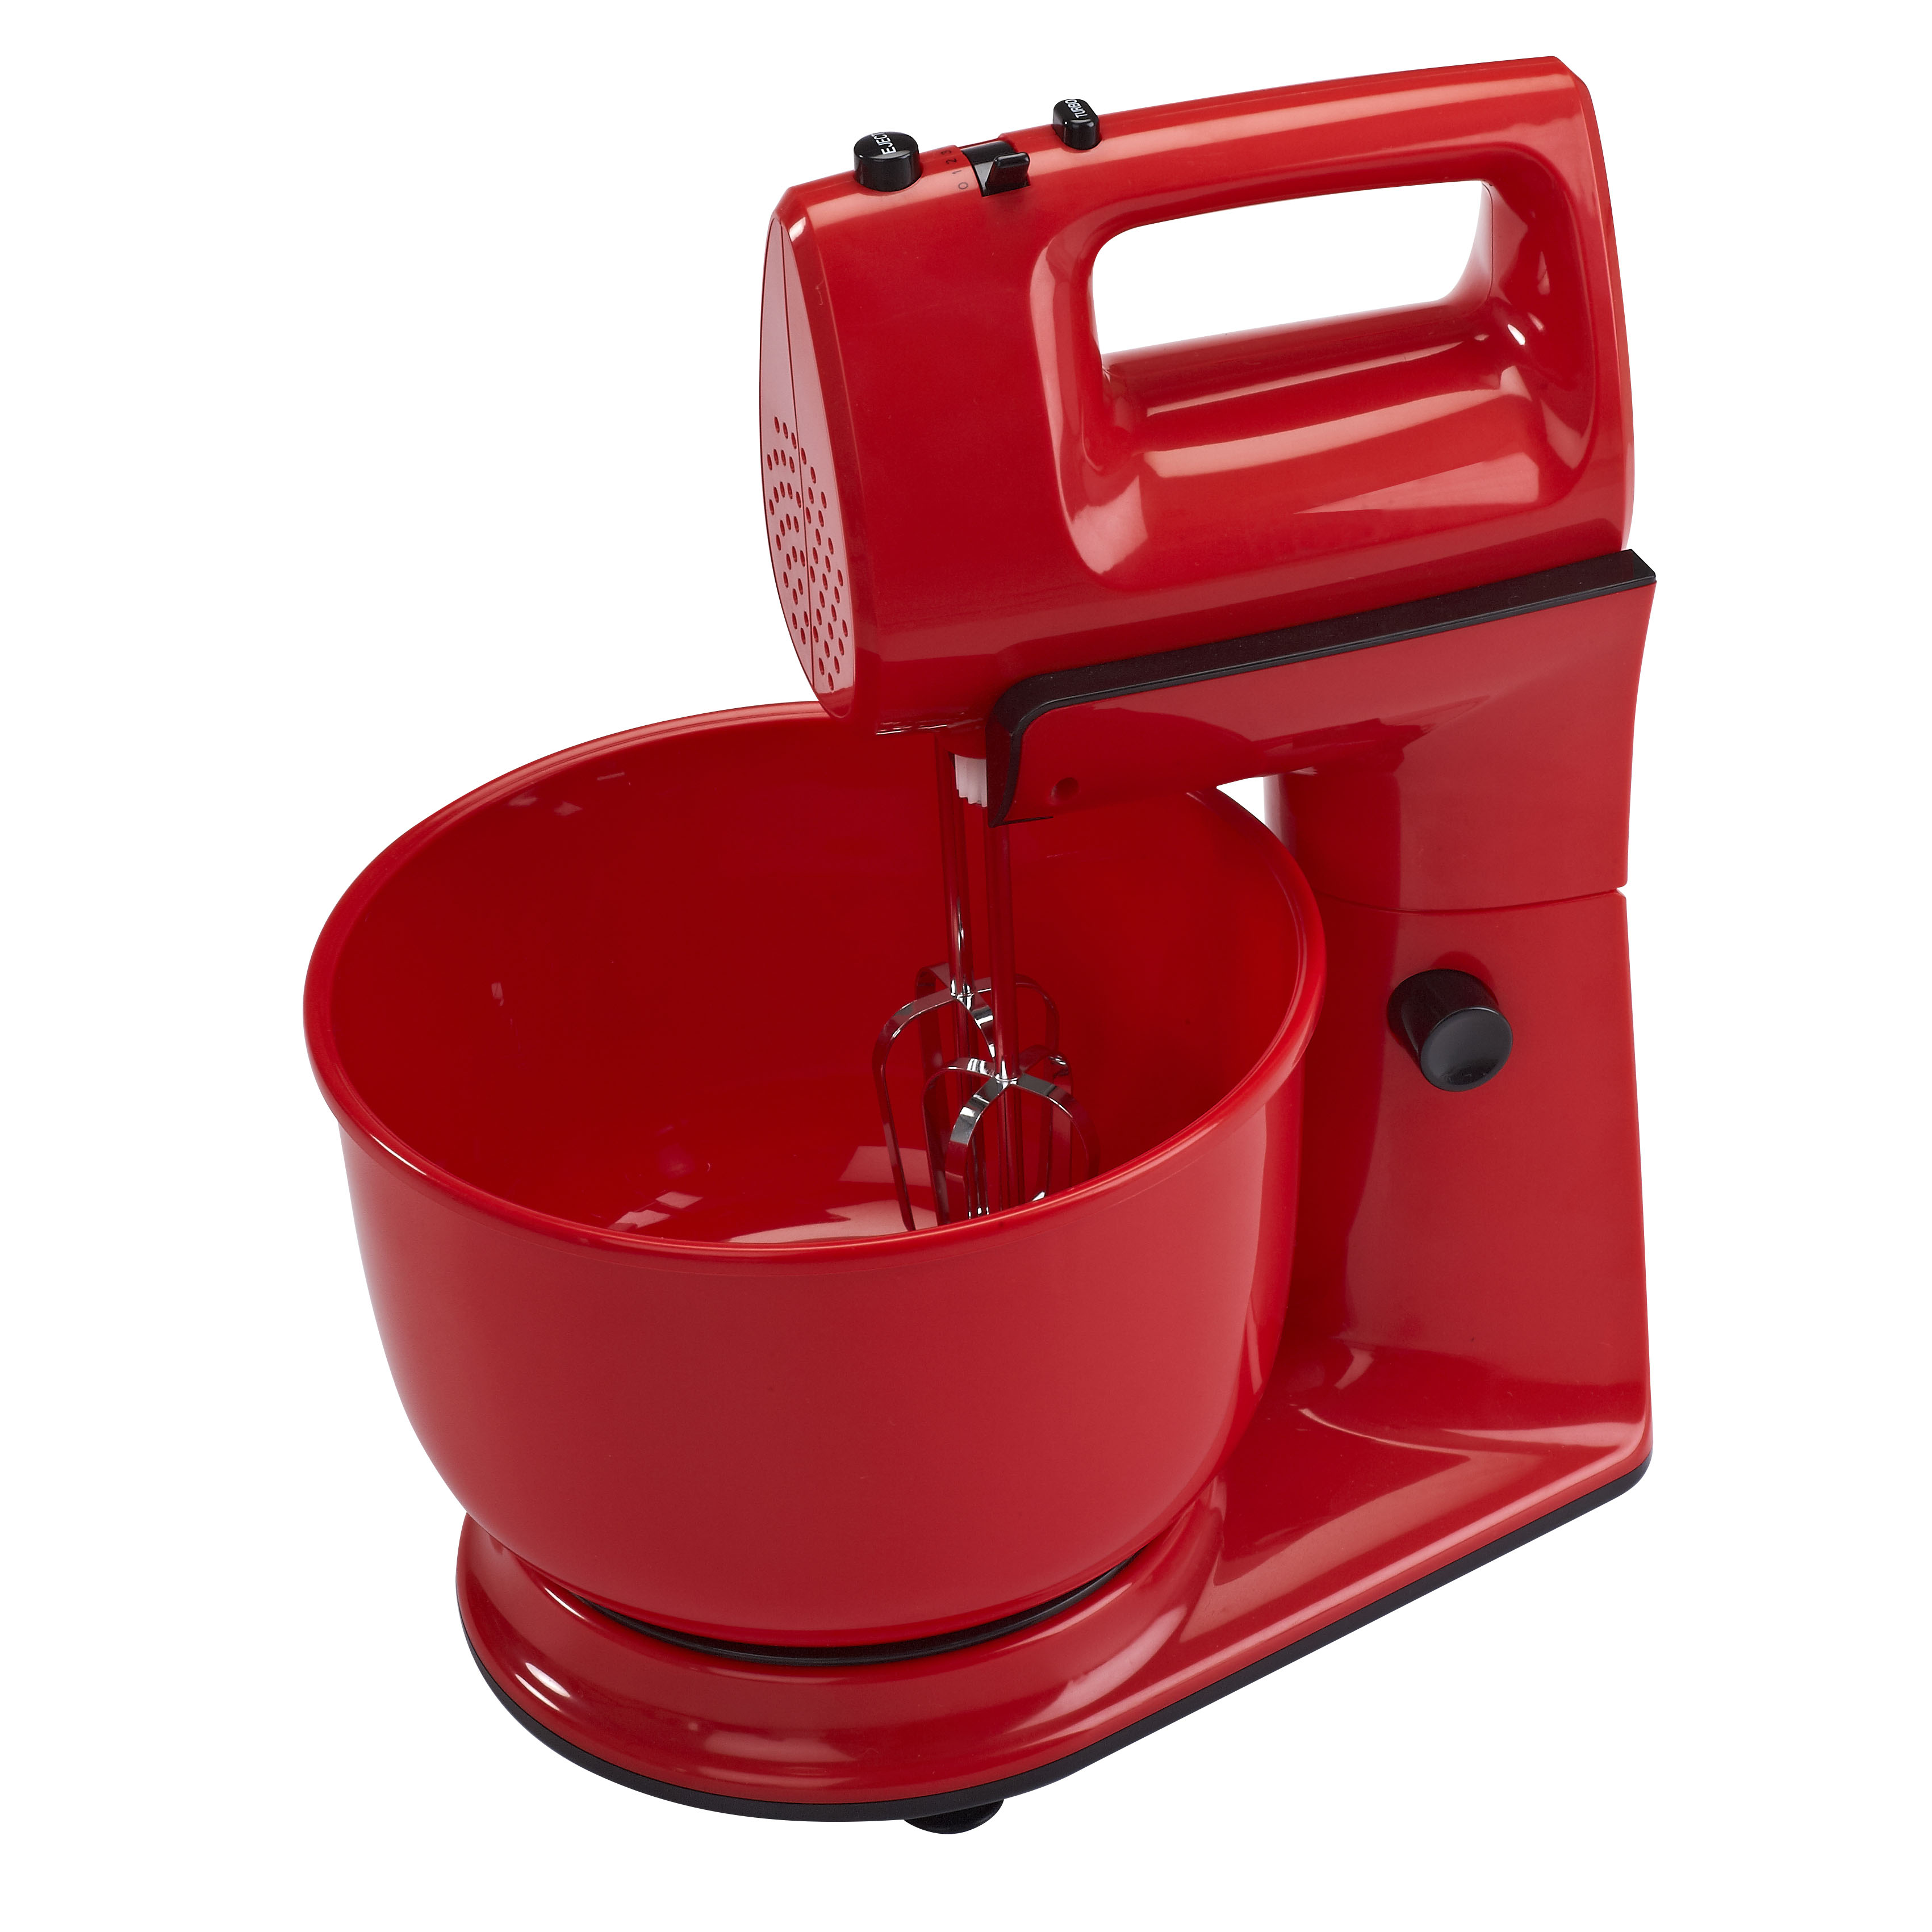 HM-1542 Hand Mixer with bowl